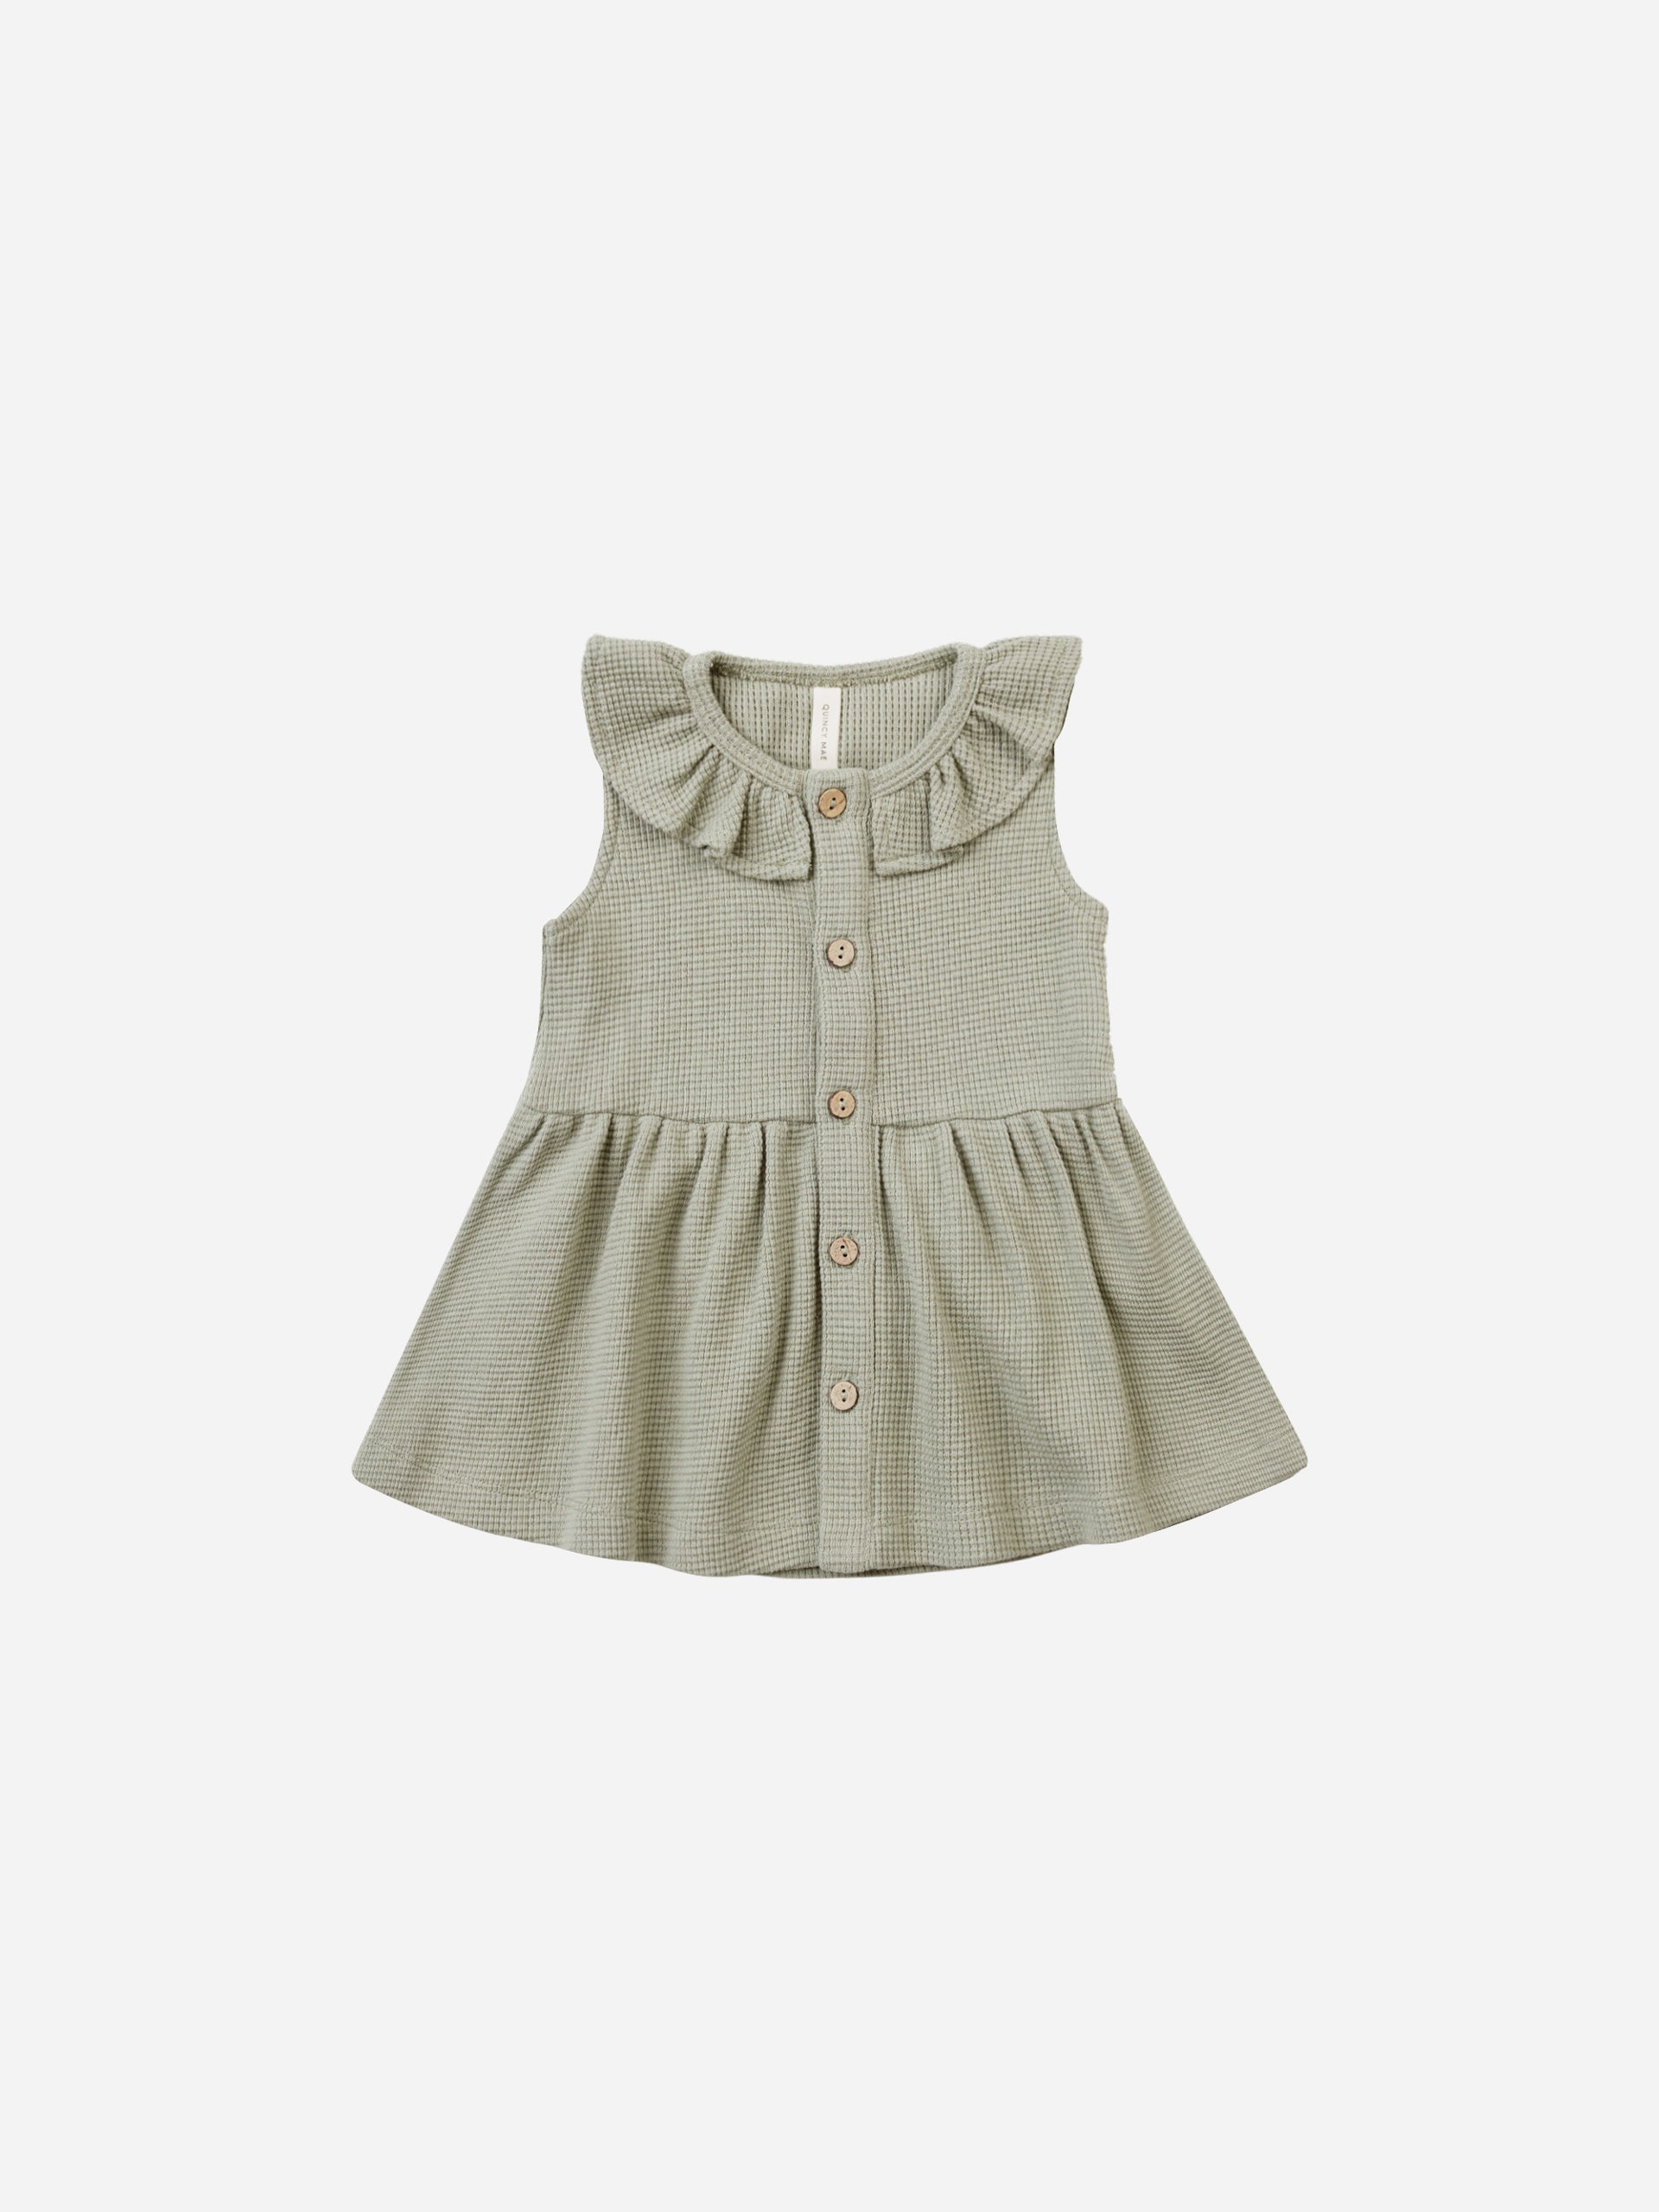 Dress Newborn 1 Year Baby Girl Dresses 3 Months Baby Girls Dresses 1 Year  Spring Color Beige Kid Size 12M